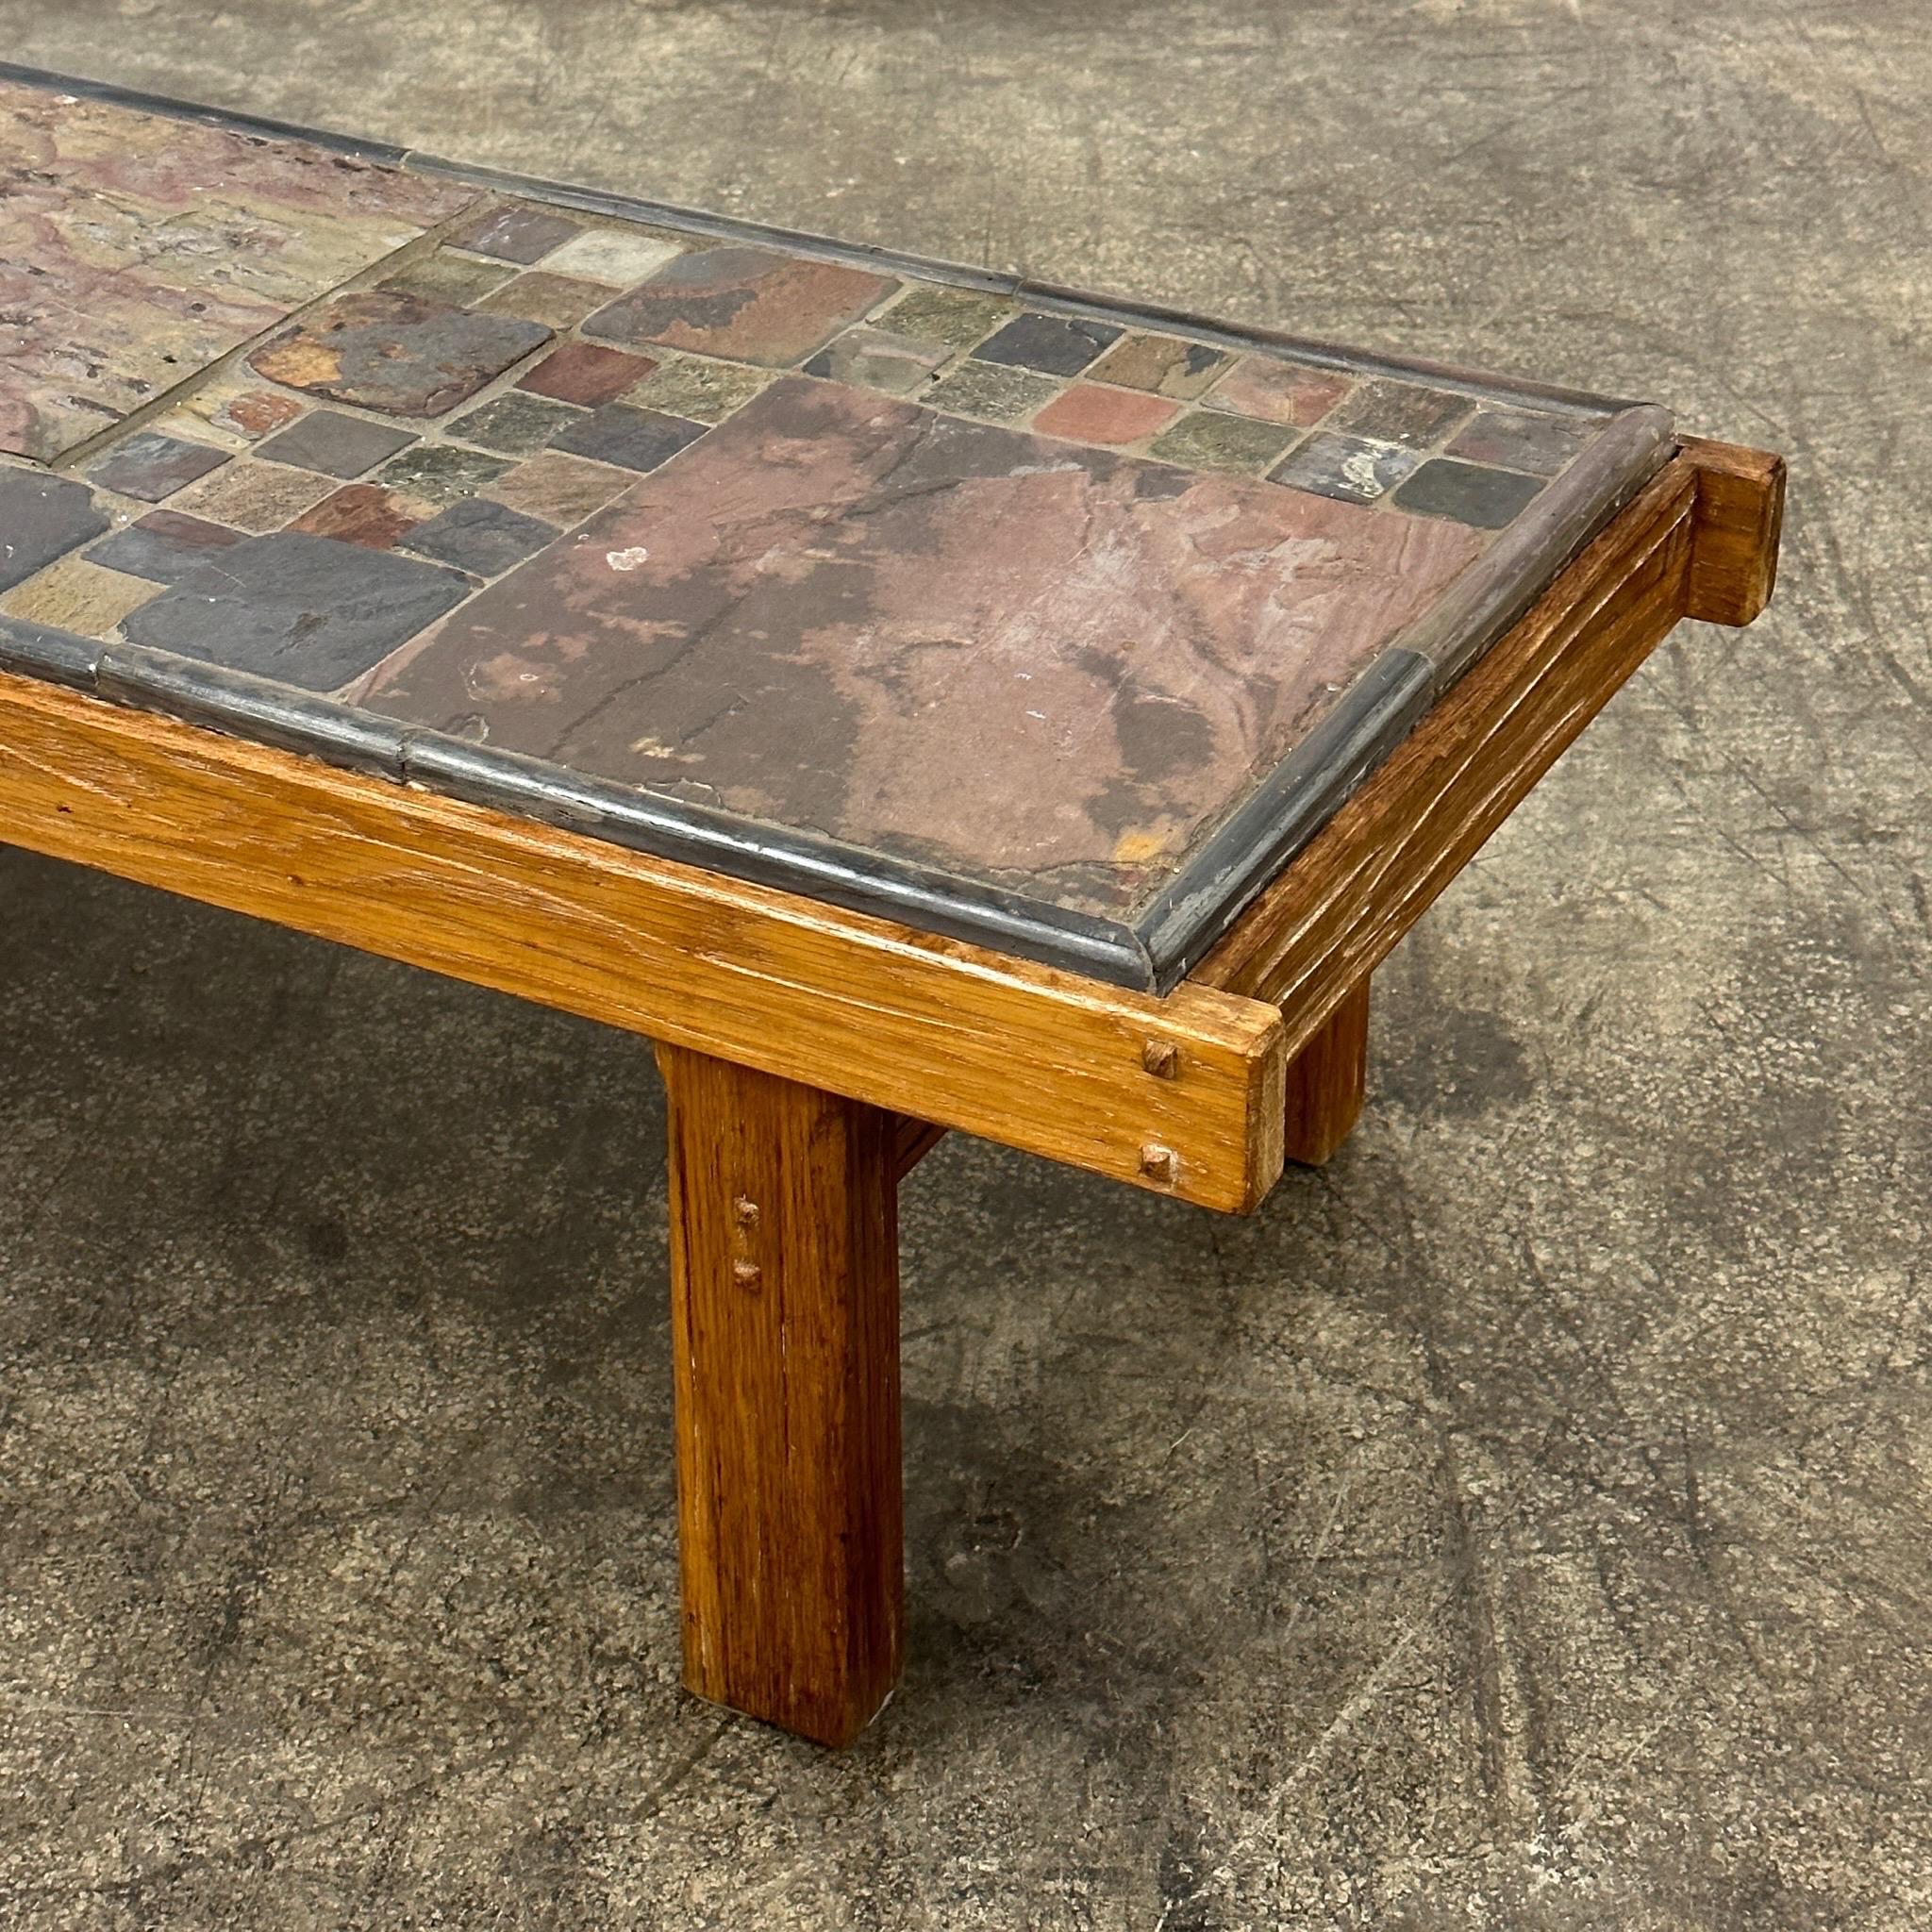 c. 20th Century. Mosaic stone slate top with wood frame. Reminiscent of Scandinavian tables. 